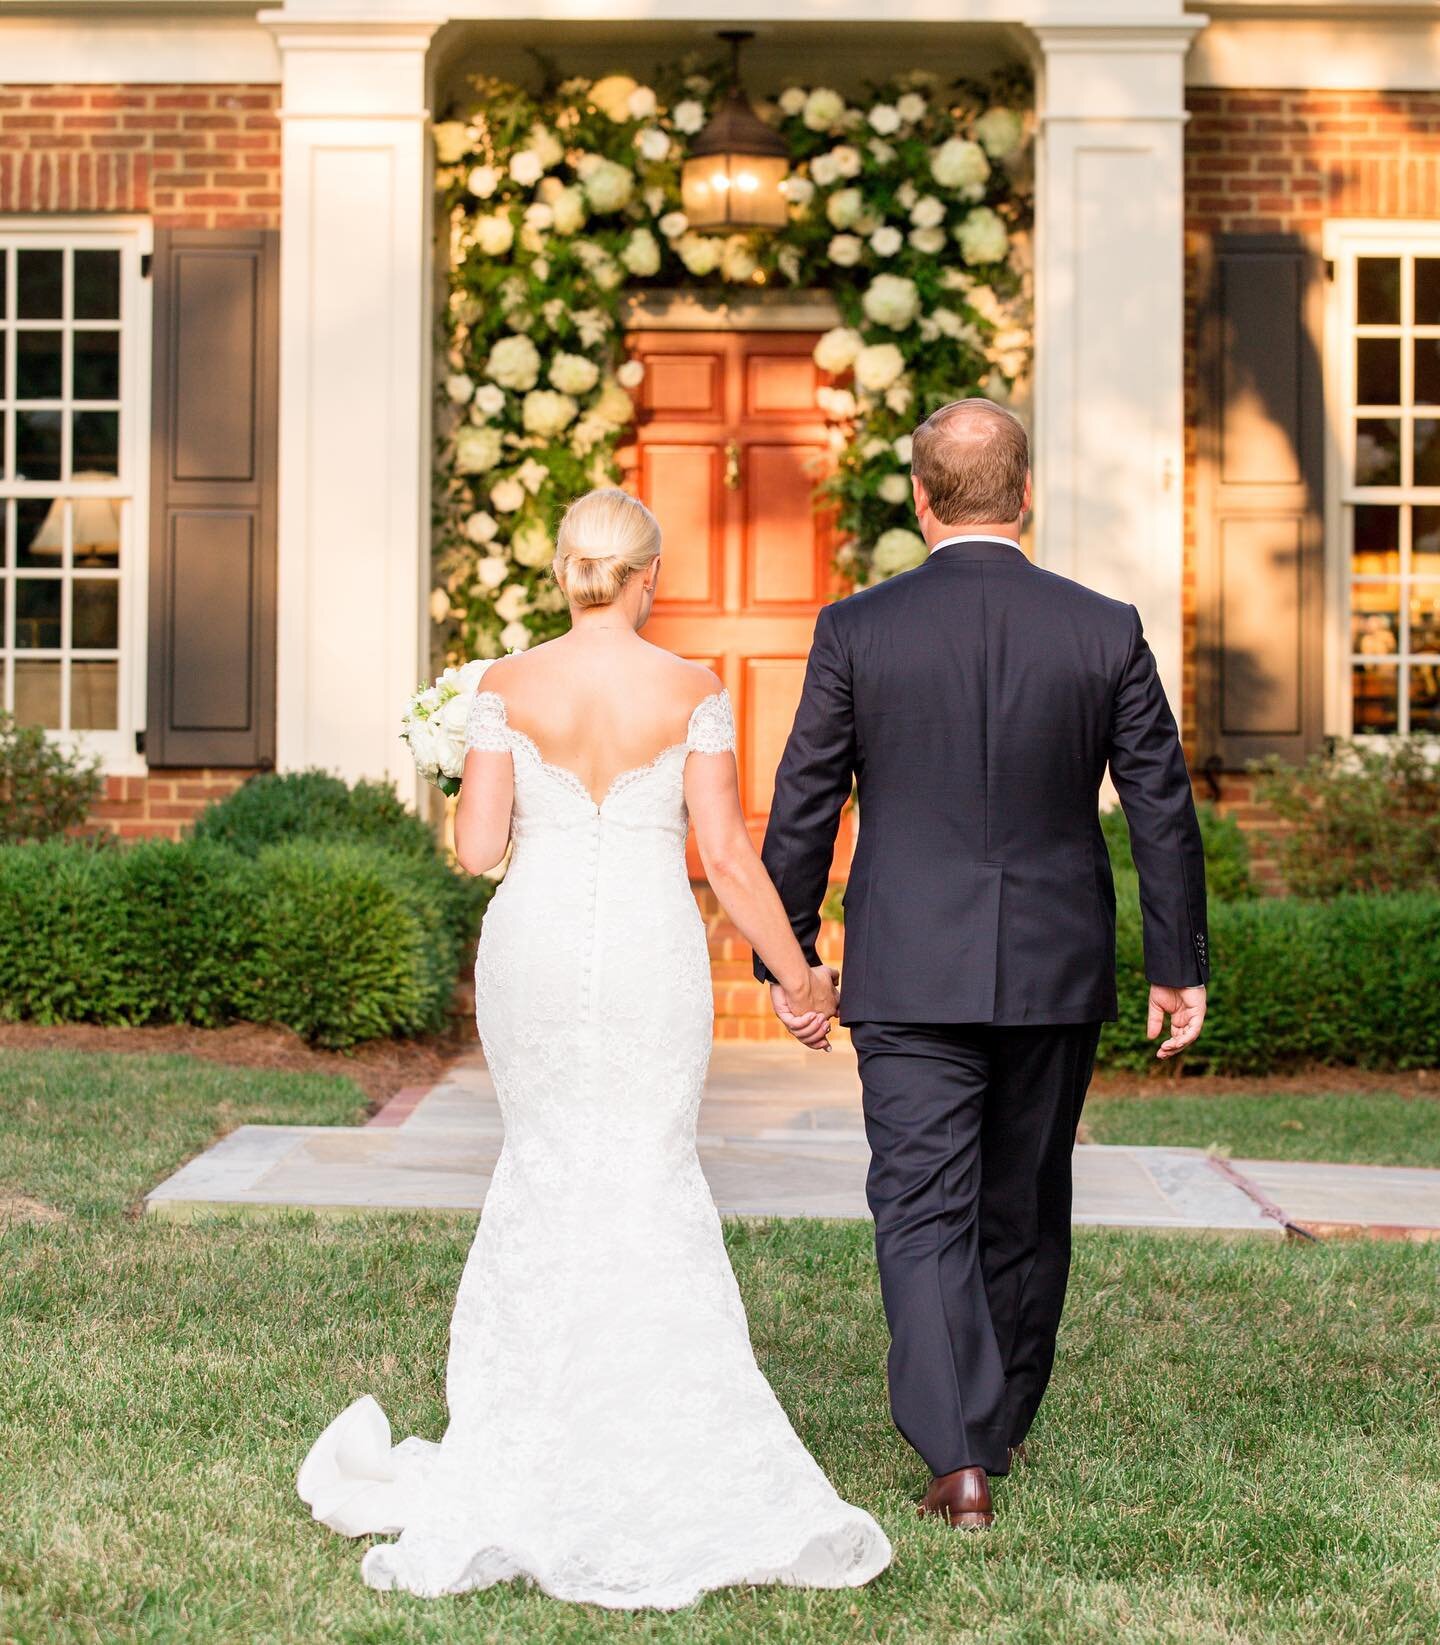 Walking into the weekend like💃💃! 
.
This couple didn&rsquo;t need just one floral entrance, but two! Some of the sweetest clients. 🥰
.
.
#brideandgroom #weddingentrance #athomewedding #athome #weddingflowers #weddingflorals #wedding #weddingdesign